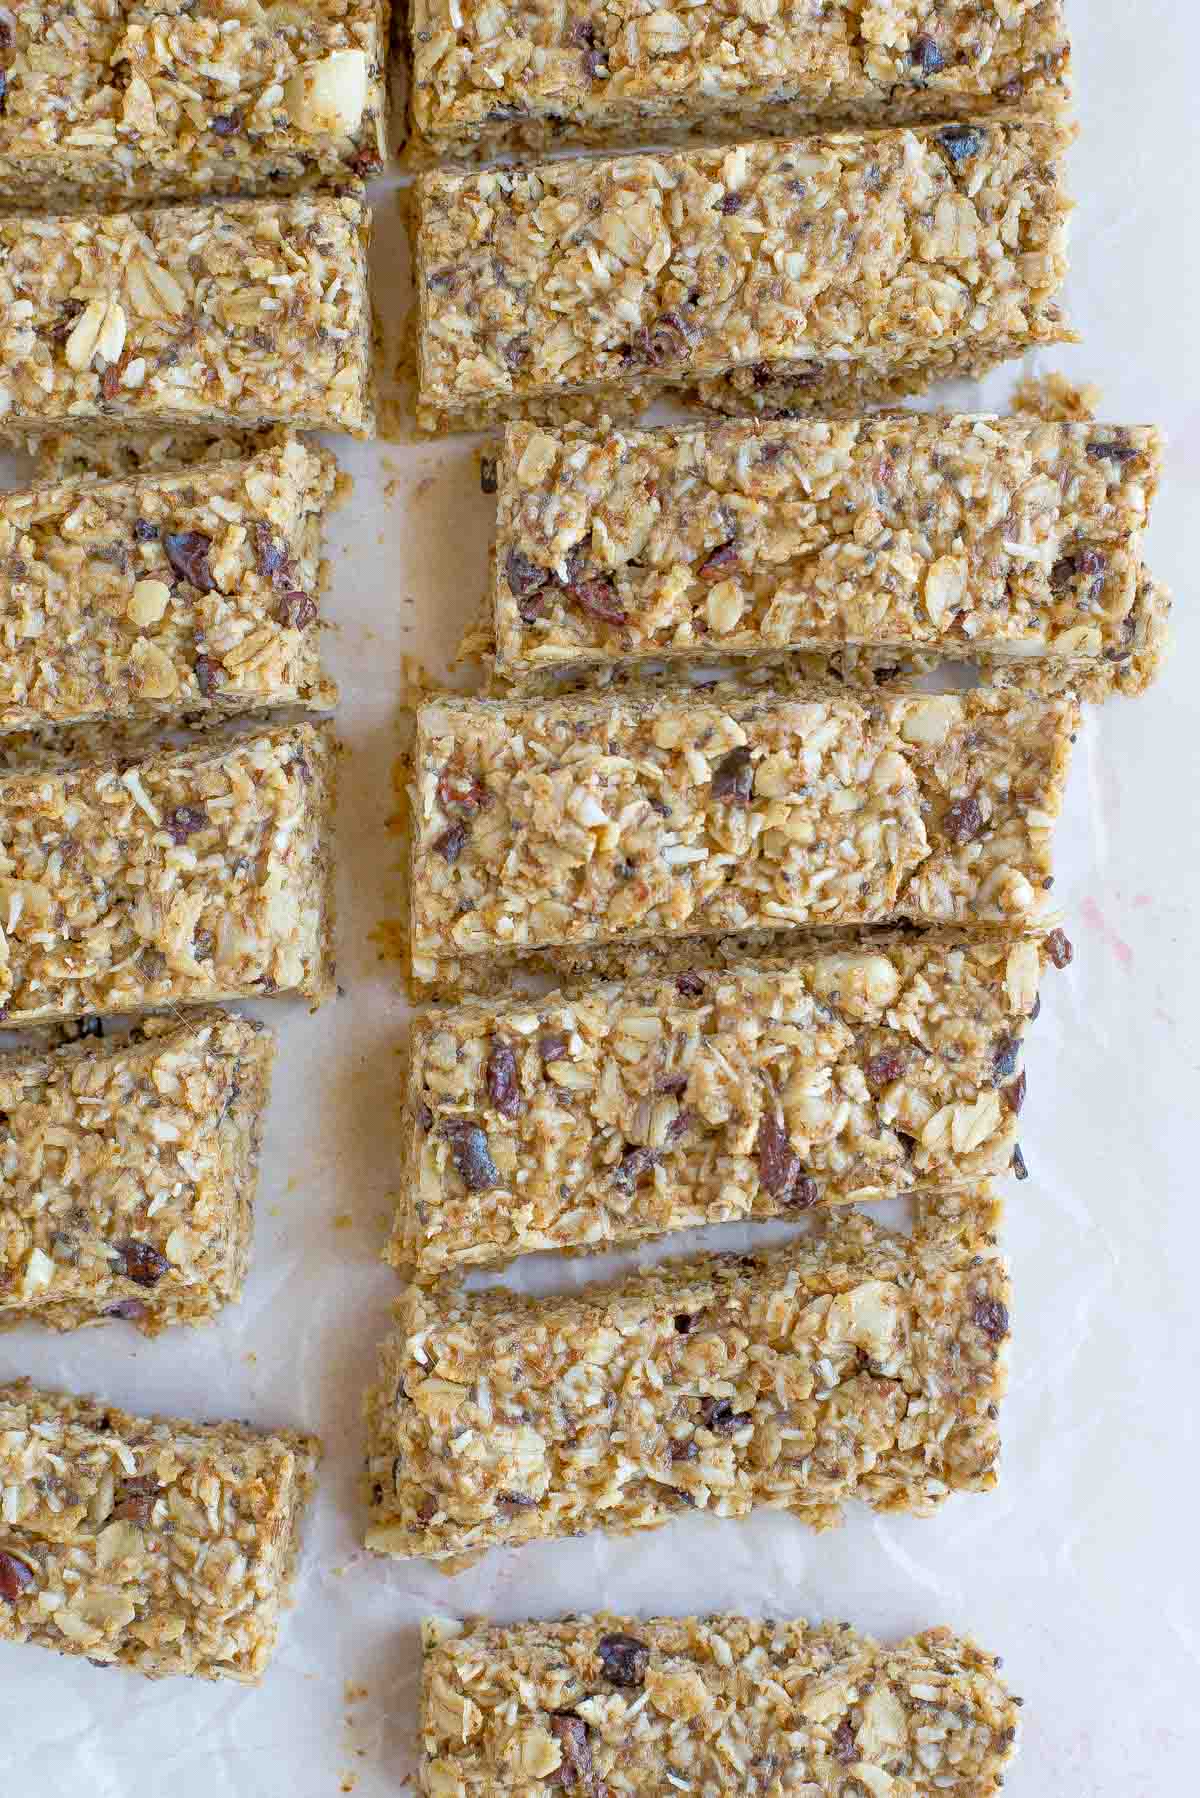 Are you looking for the perfect homemade snack? Check out this 10 minute chewy, no-bake, gluten-free granola bar recipe. You'll be glad you did.